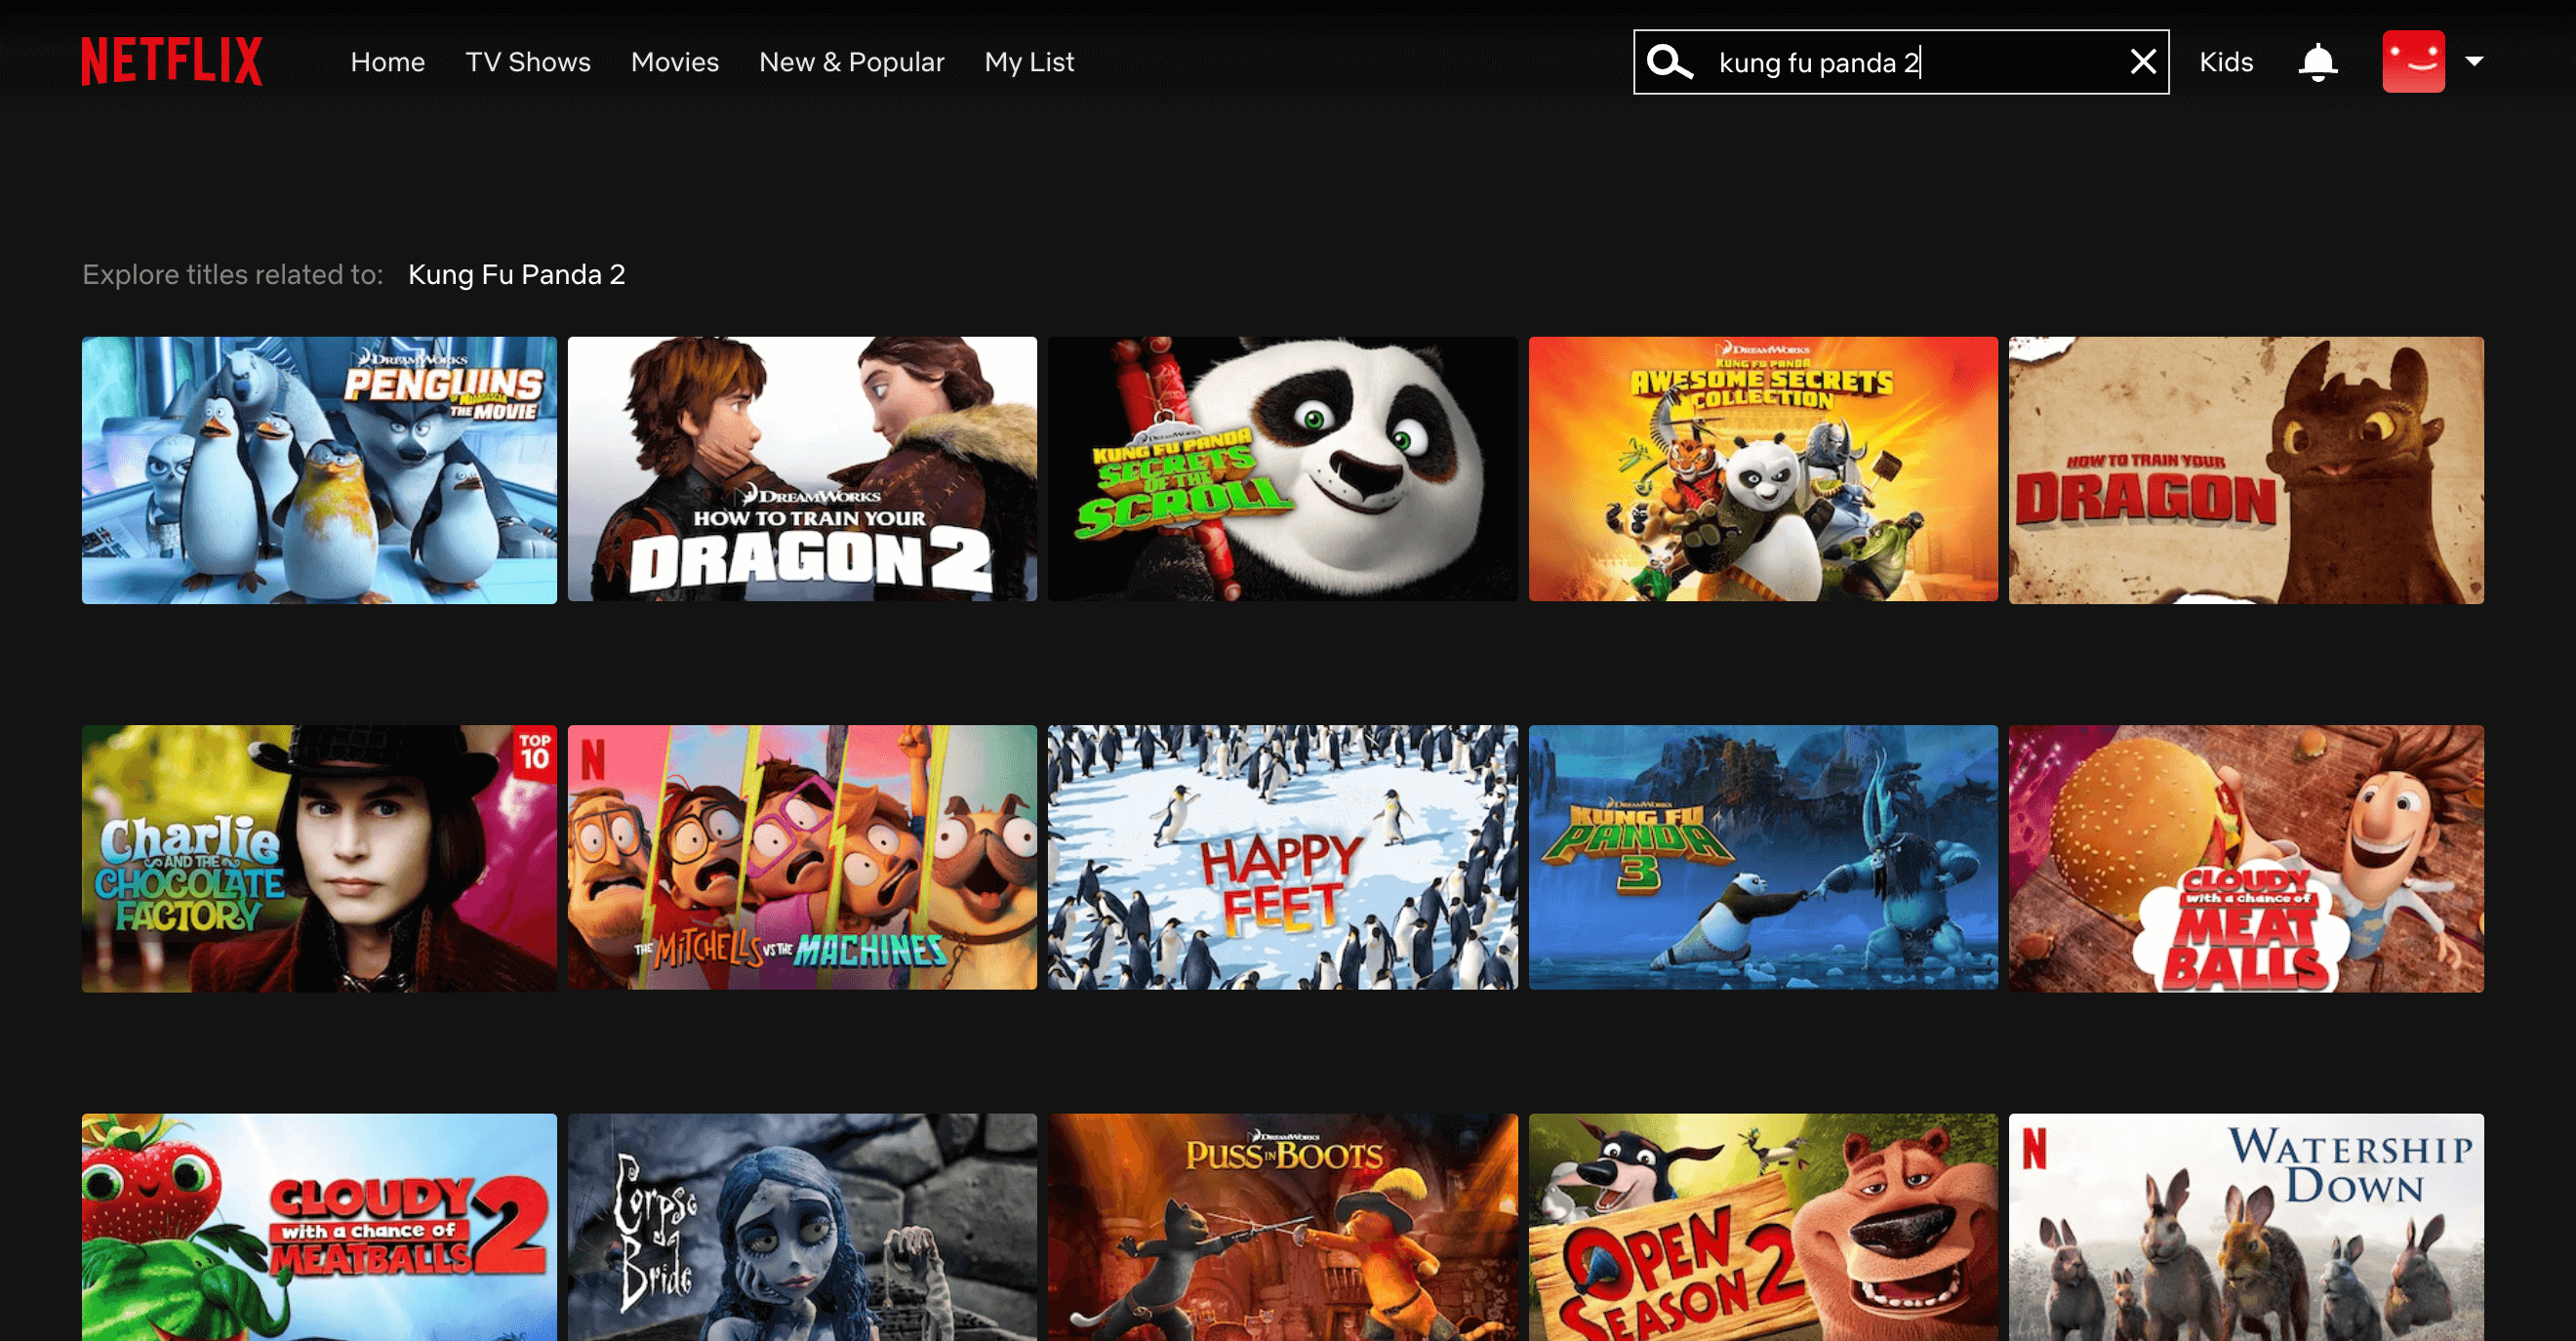 Kung Fu Panda 2 is not available on Netflix US